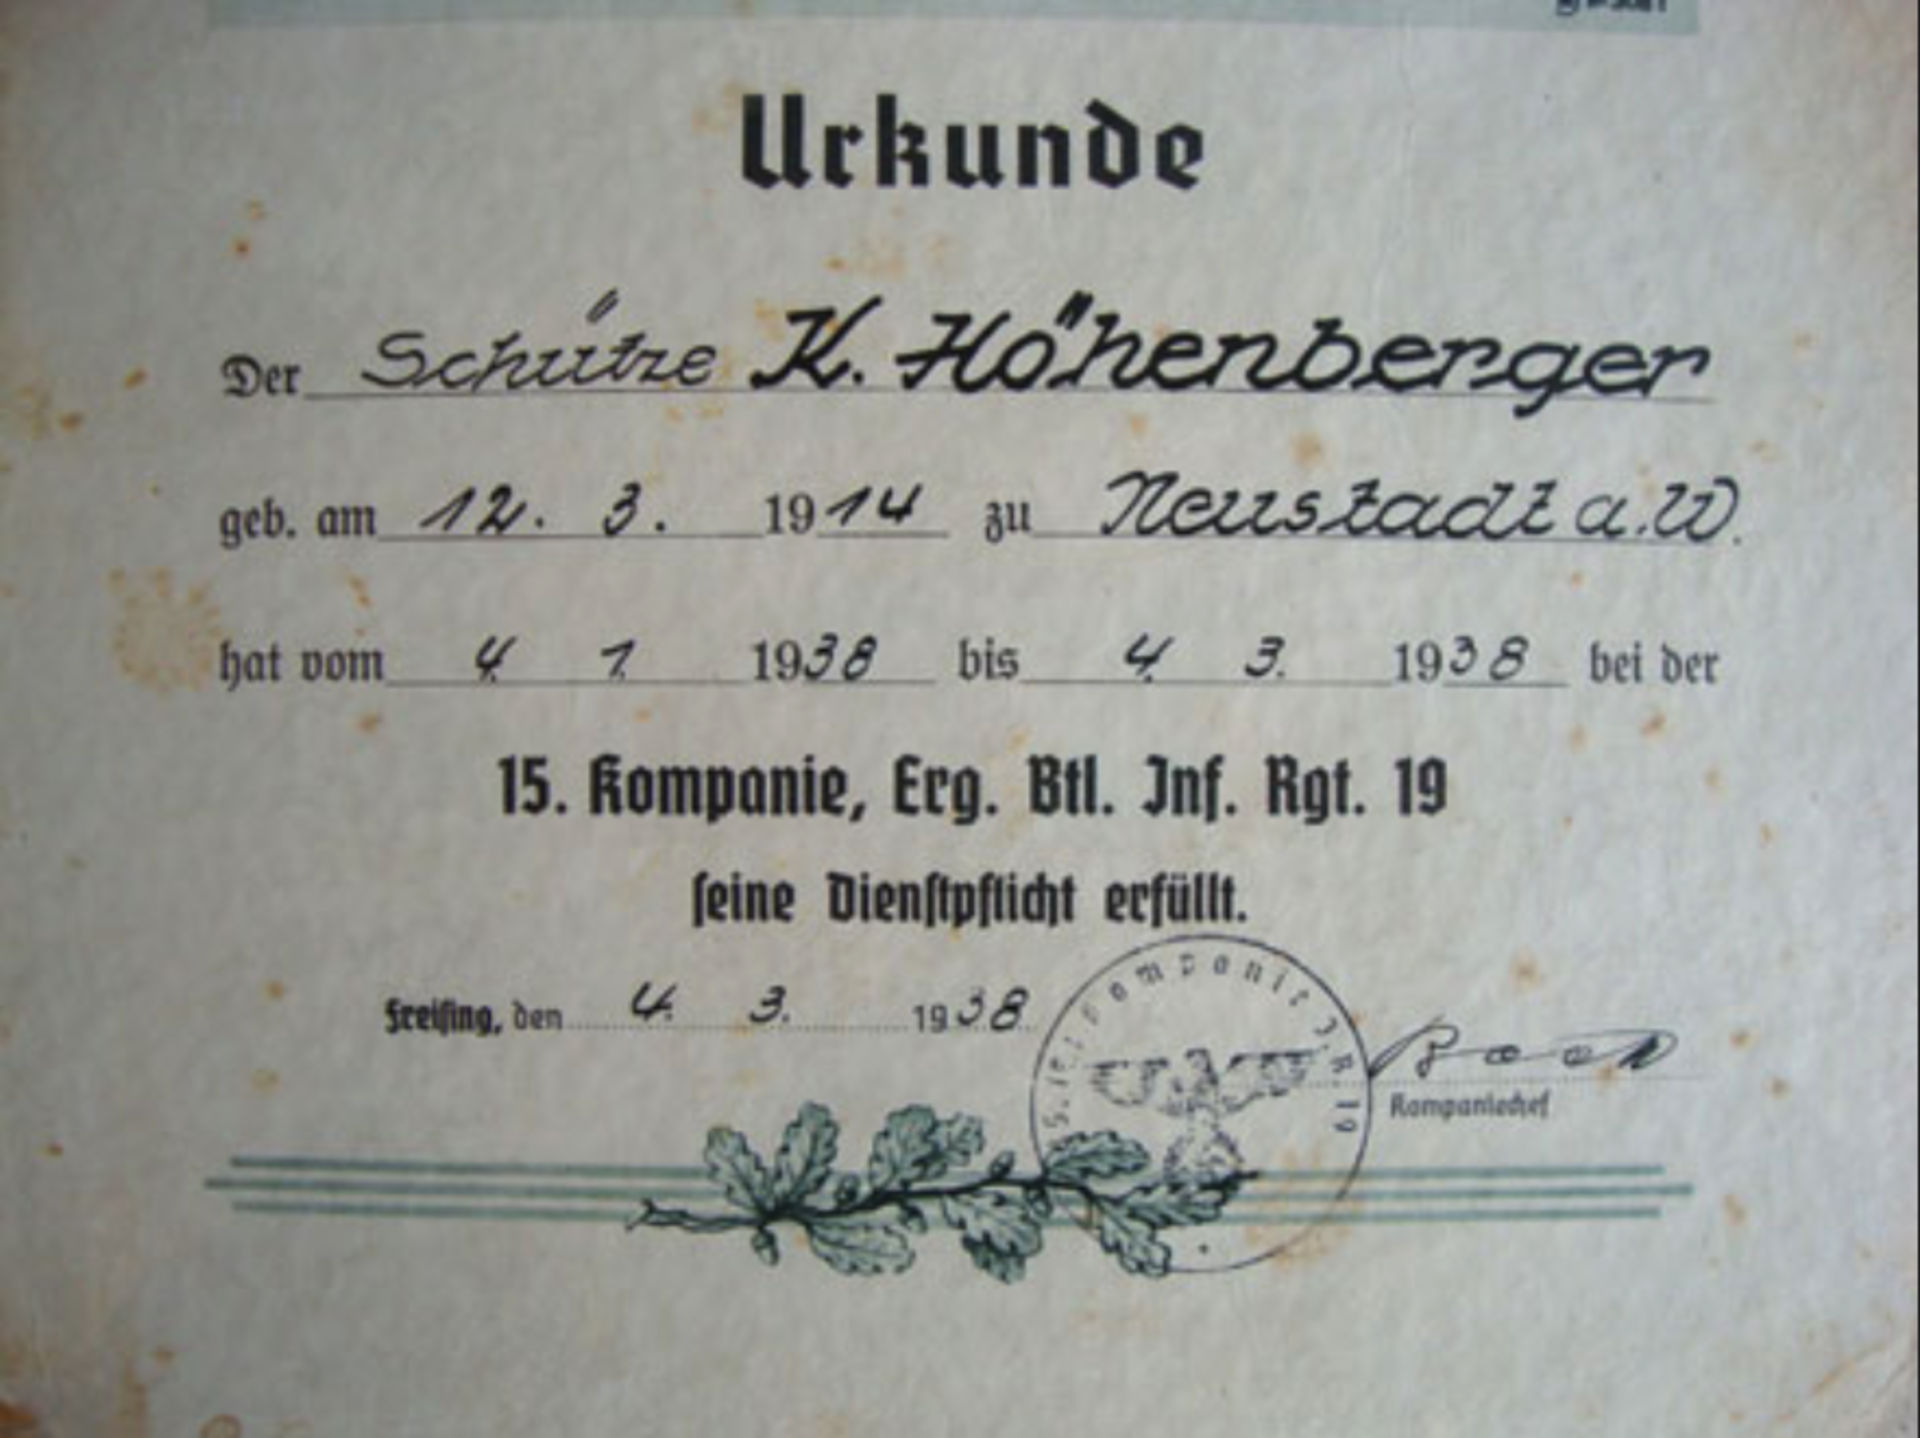 Original Researchable German WW2 Signed Certificate Of Training, To Rifleman K. Hohenberger - Image 2 of 3